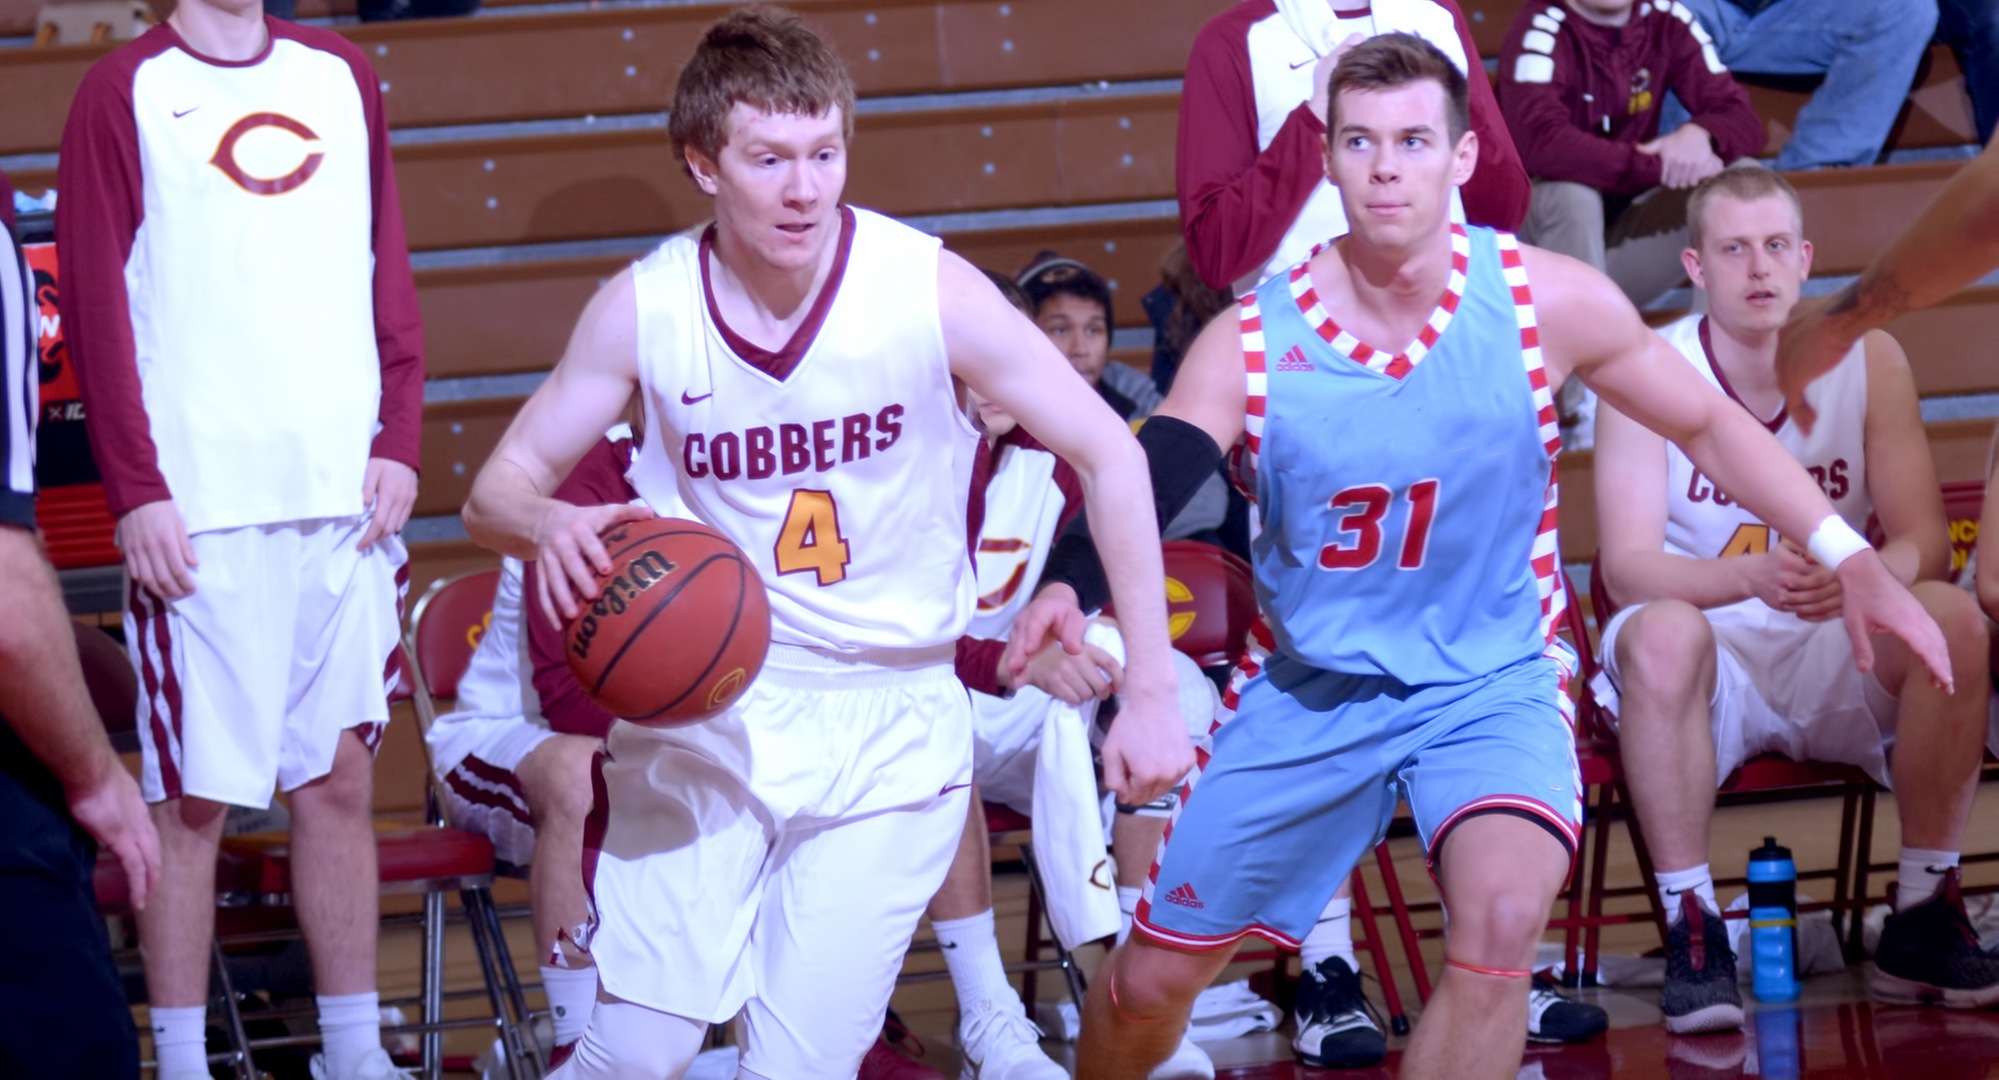 Collin Larson had a team-high 18 points in the Cobbers' game at St. Olaf. Larson has now scored at least 10 points in four straight games.